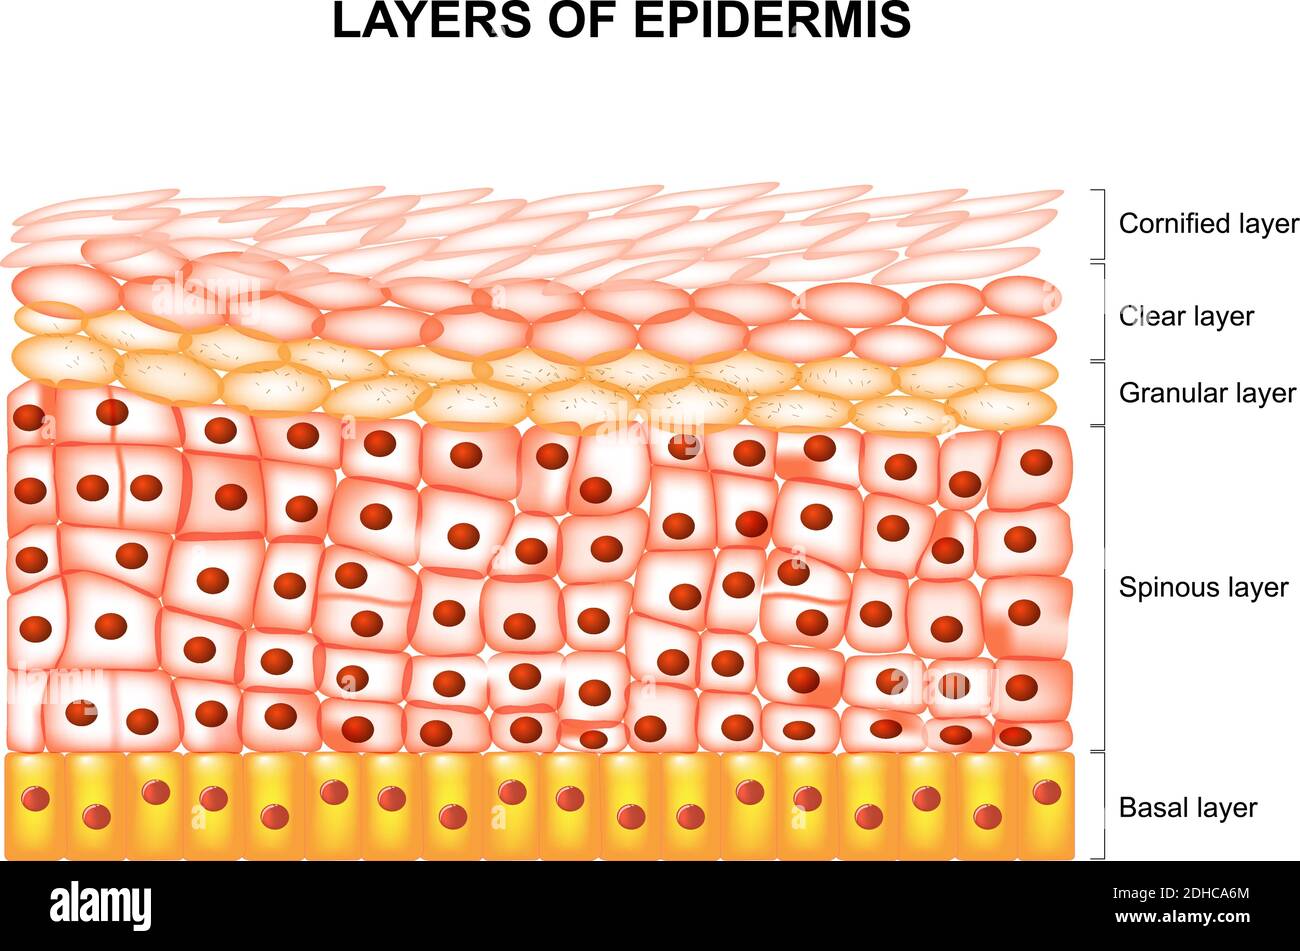 Layers of epidermis : cornified, clear, granular, spinous and basal layer. Illustration showing a section of epidermis with epidermal layers labeled. Stock Vector